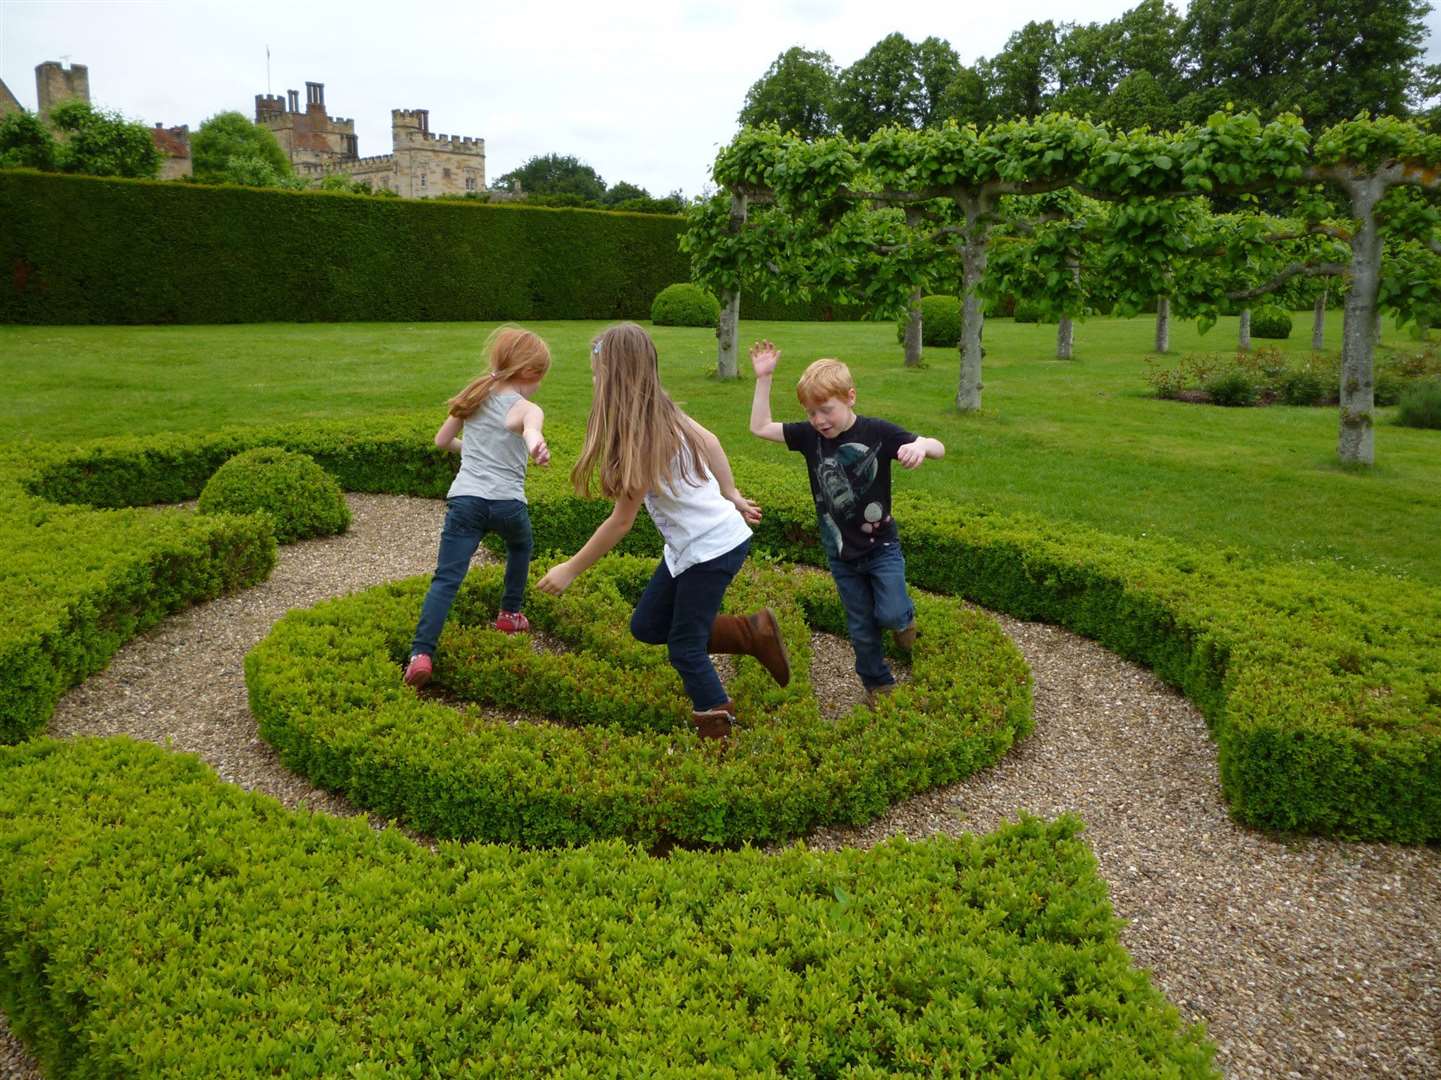 Penshurst Place has plenty going on inside and out